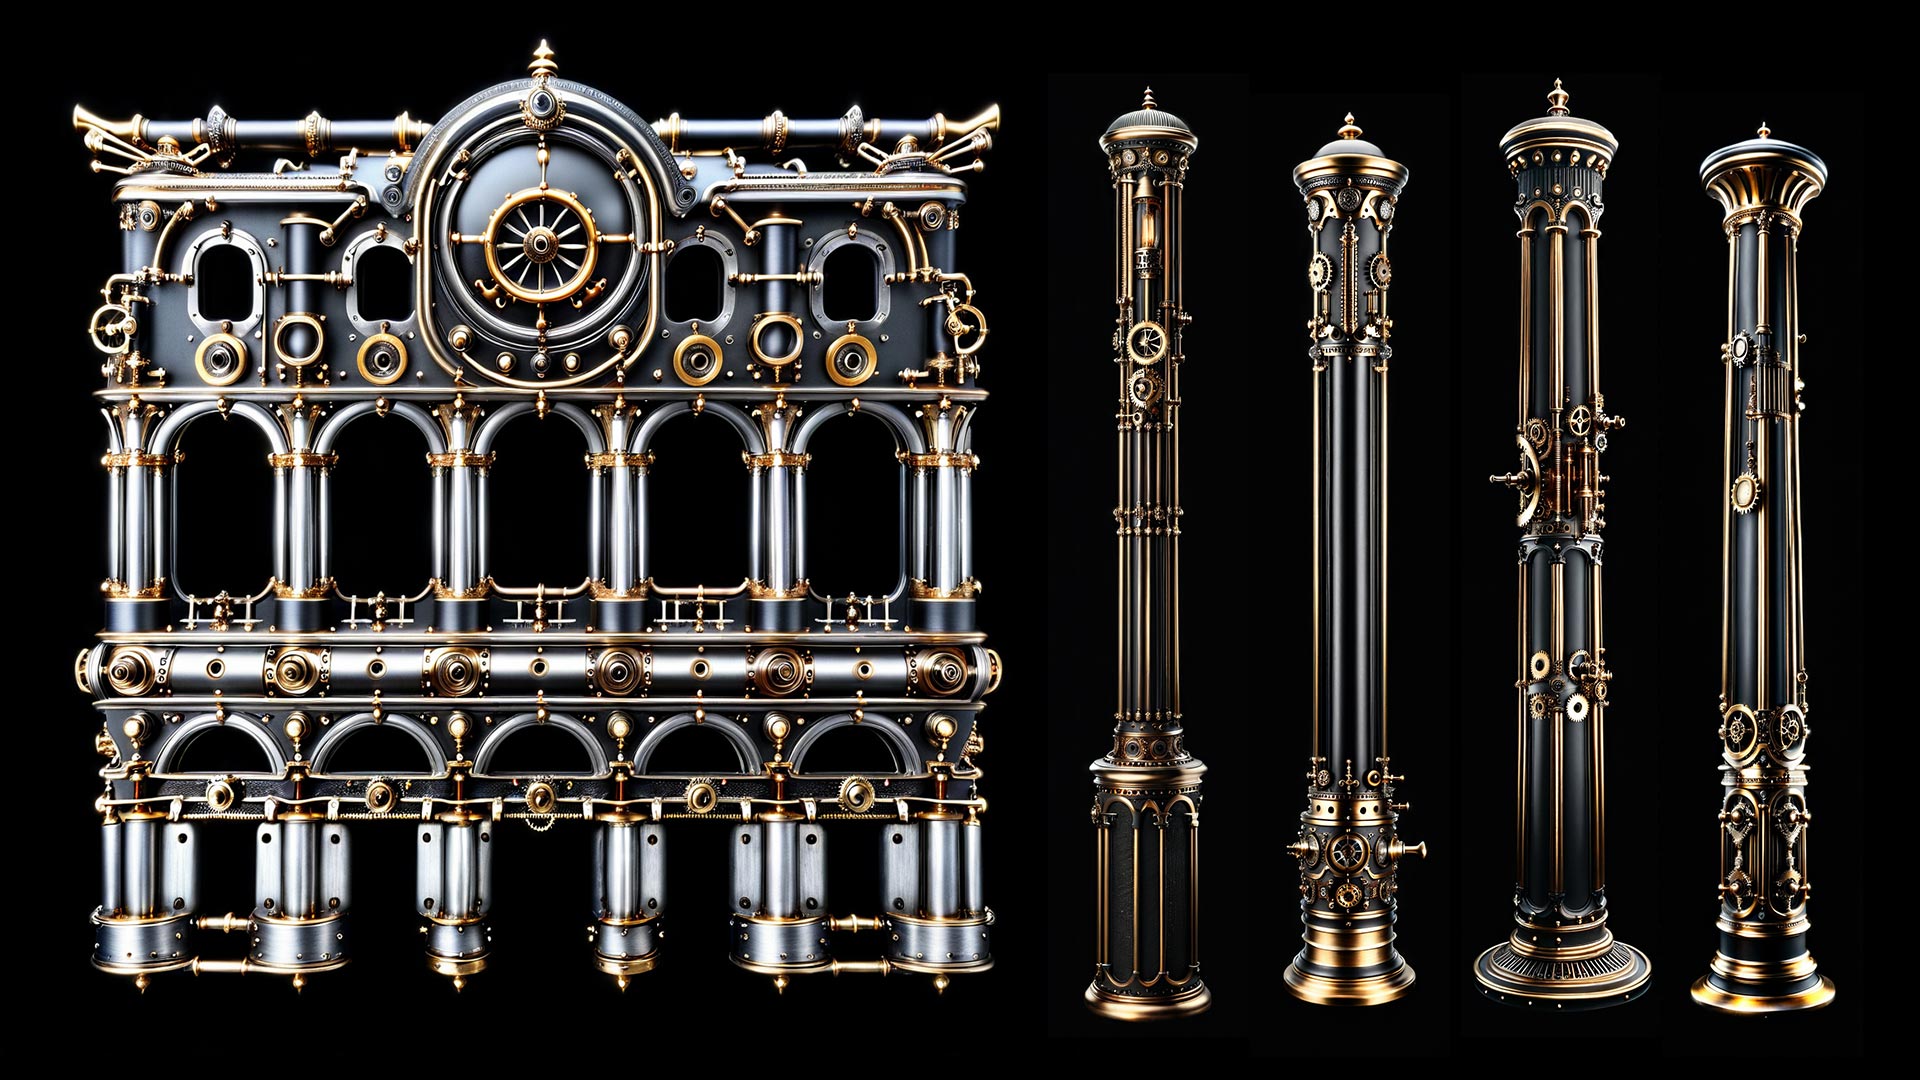 Steampunk Facade decorative elements for projection mapping